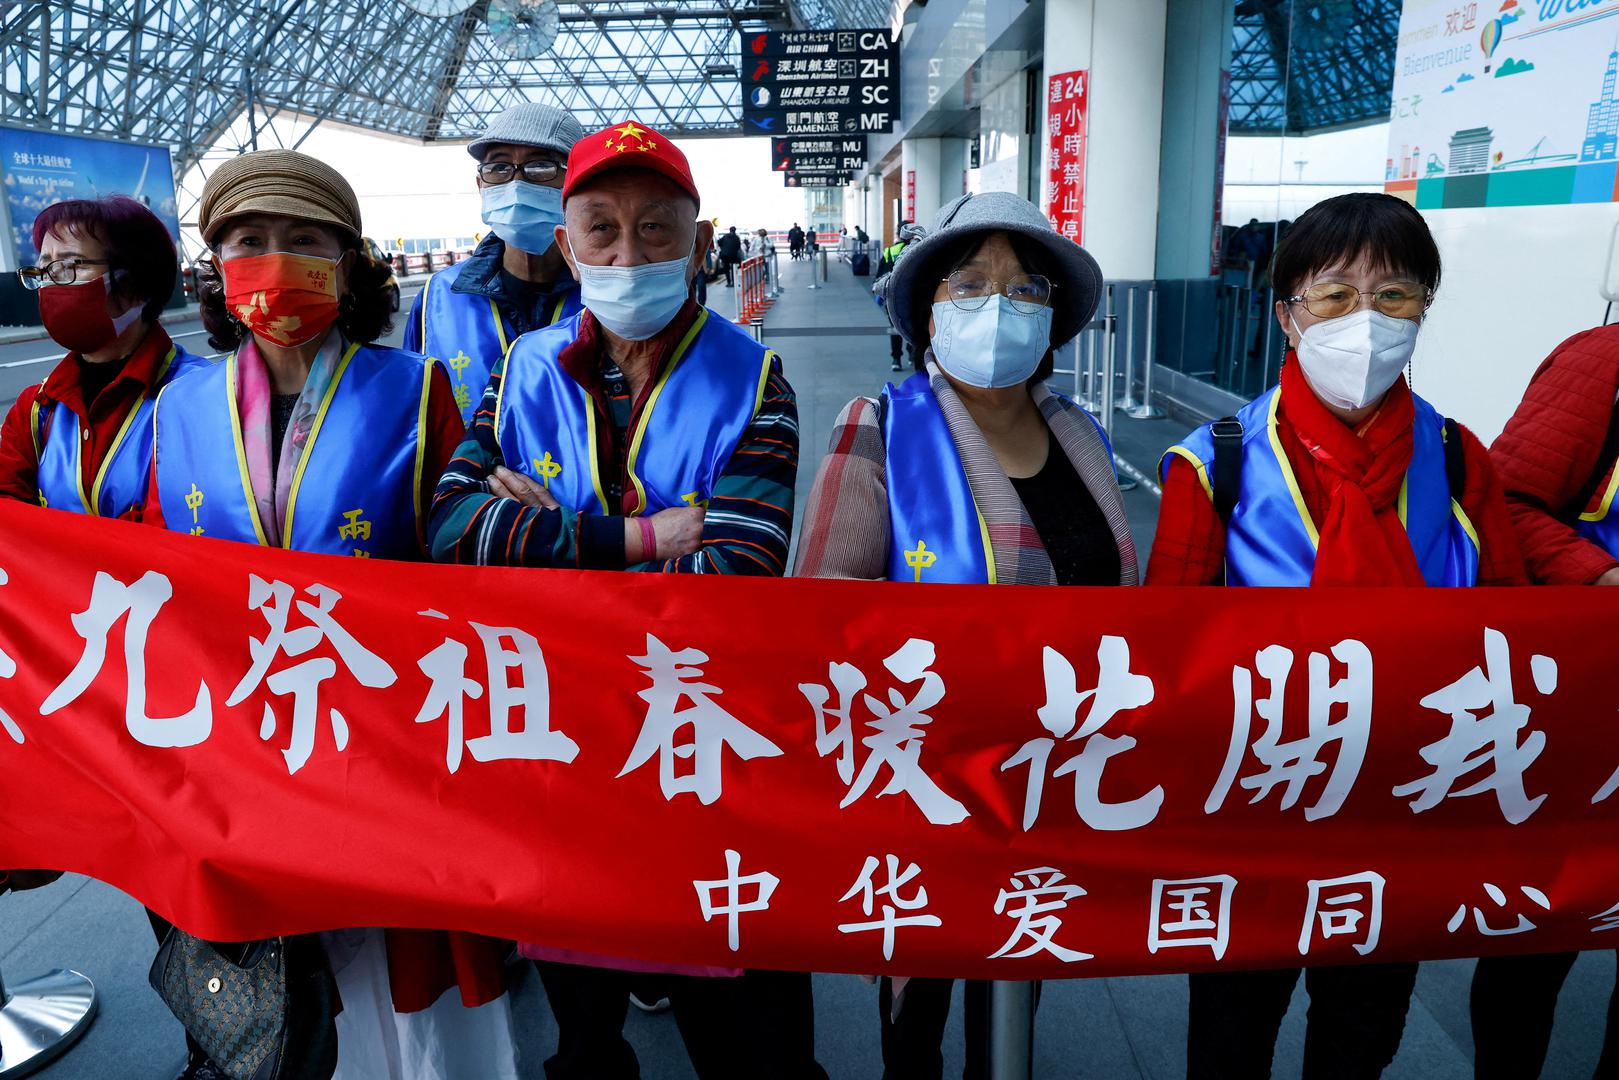 Supporters gather outside the airport to welcome former Taiwan President Ma Ying-jeou for his visit to China in Taoyuan, Taiwan March 27, 2023. REUTERS/Ann Wang Photo: Ann Wang/REUTERS